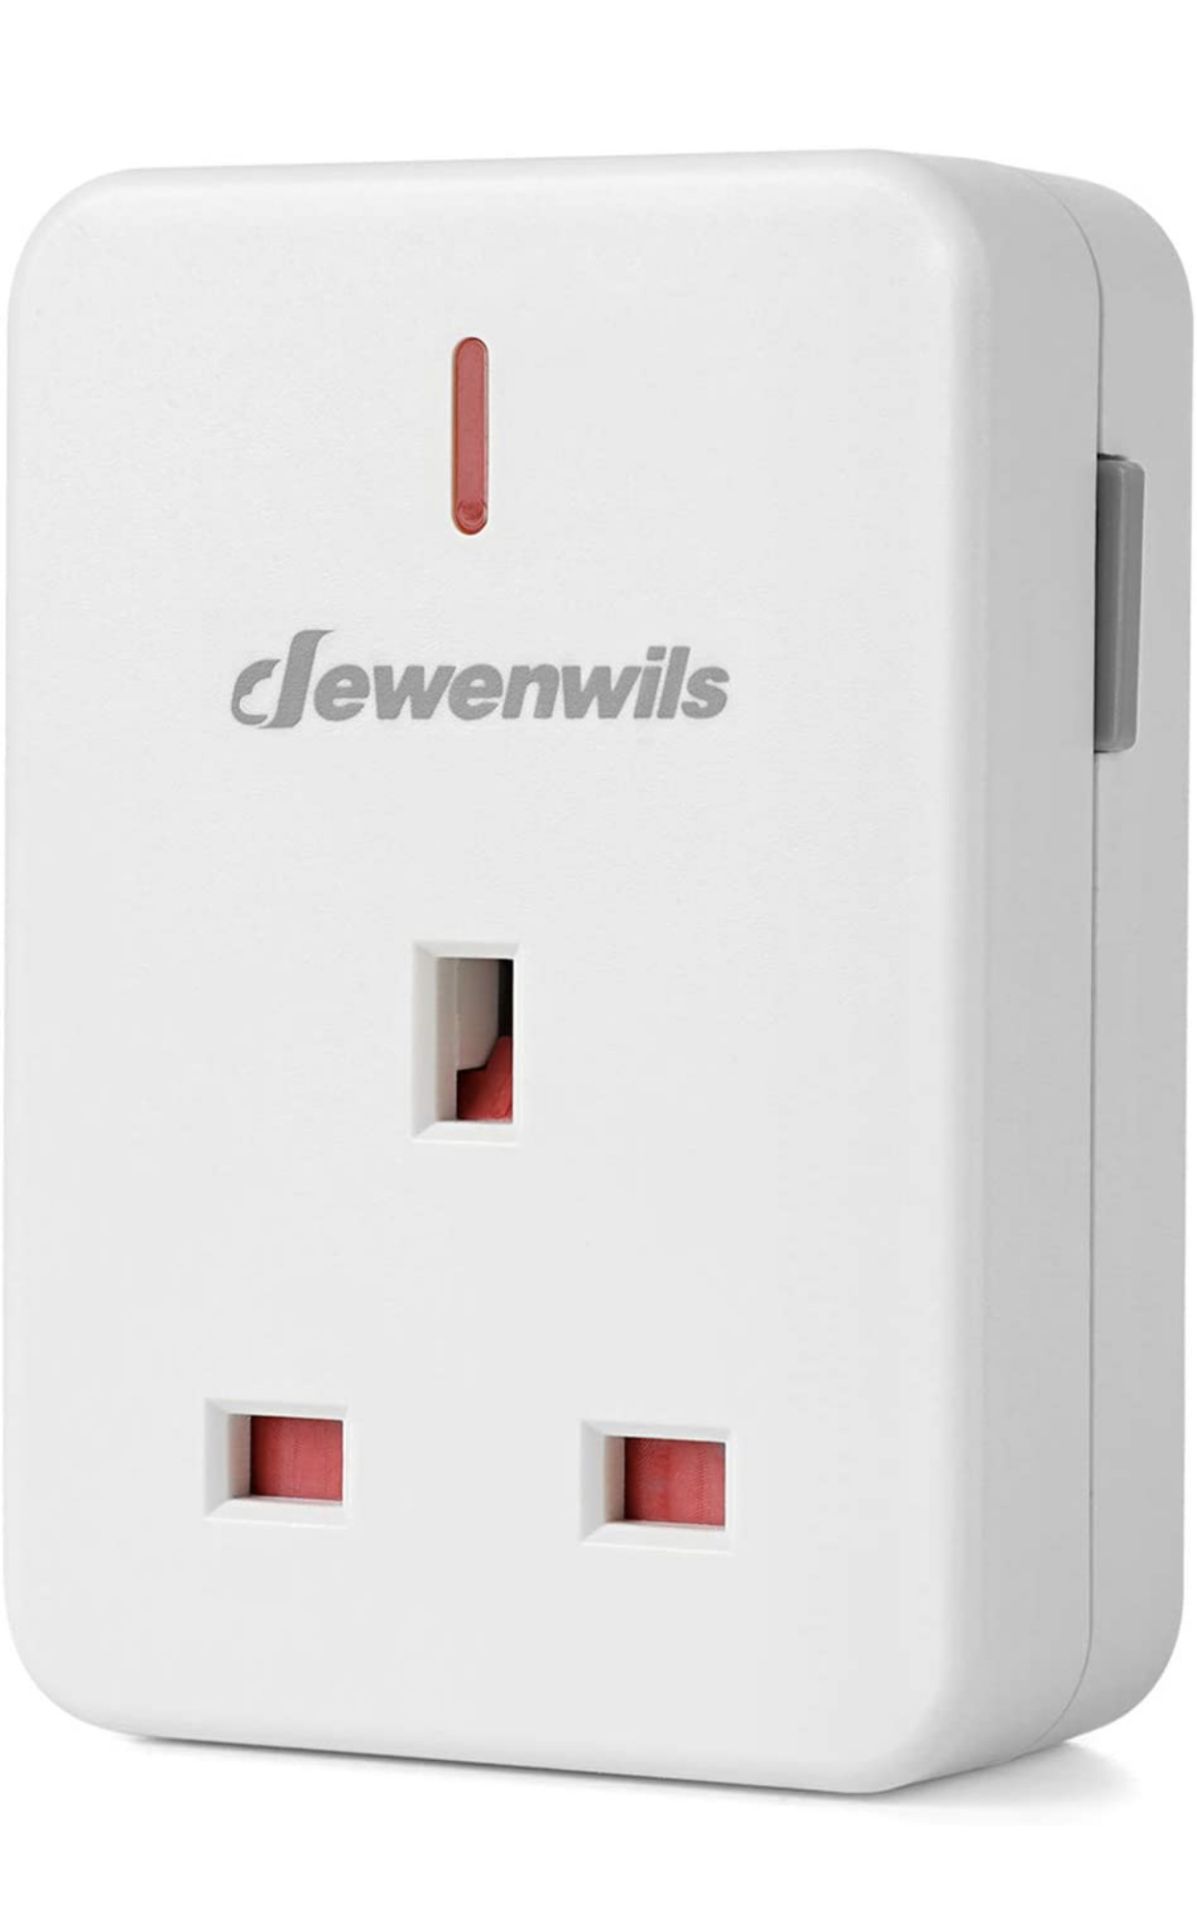 RRP £70 Set of 7 x Dewenwils Single Plug Sockets Compatible with Remote Control Sockets